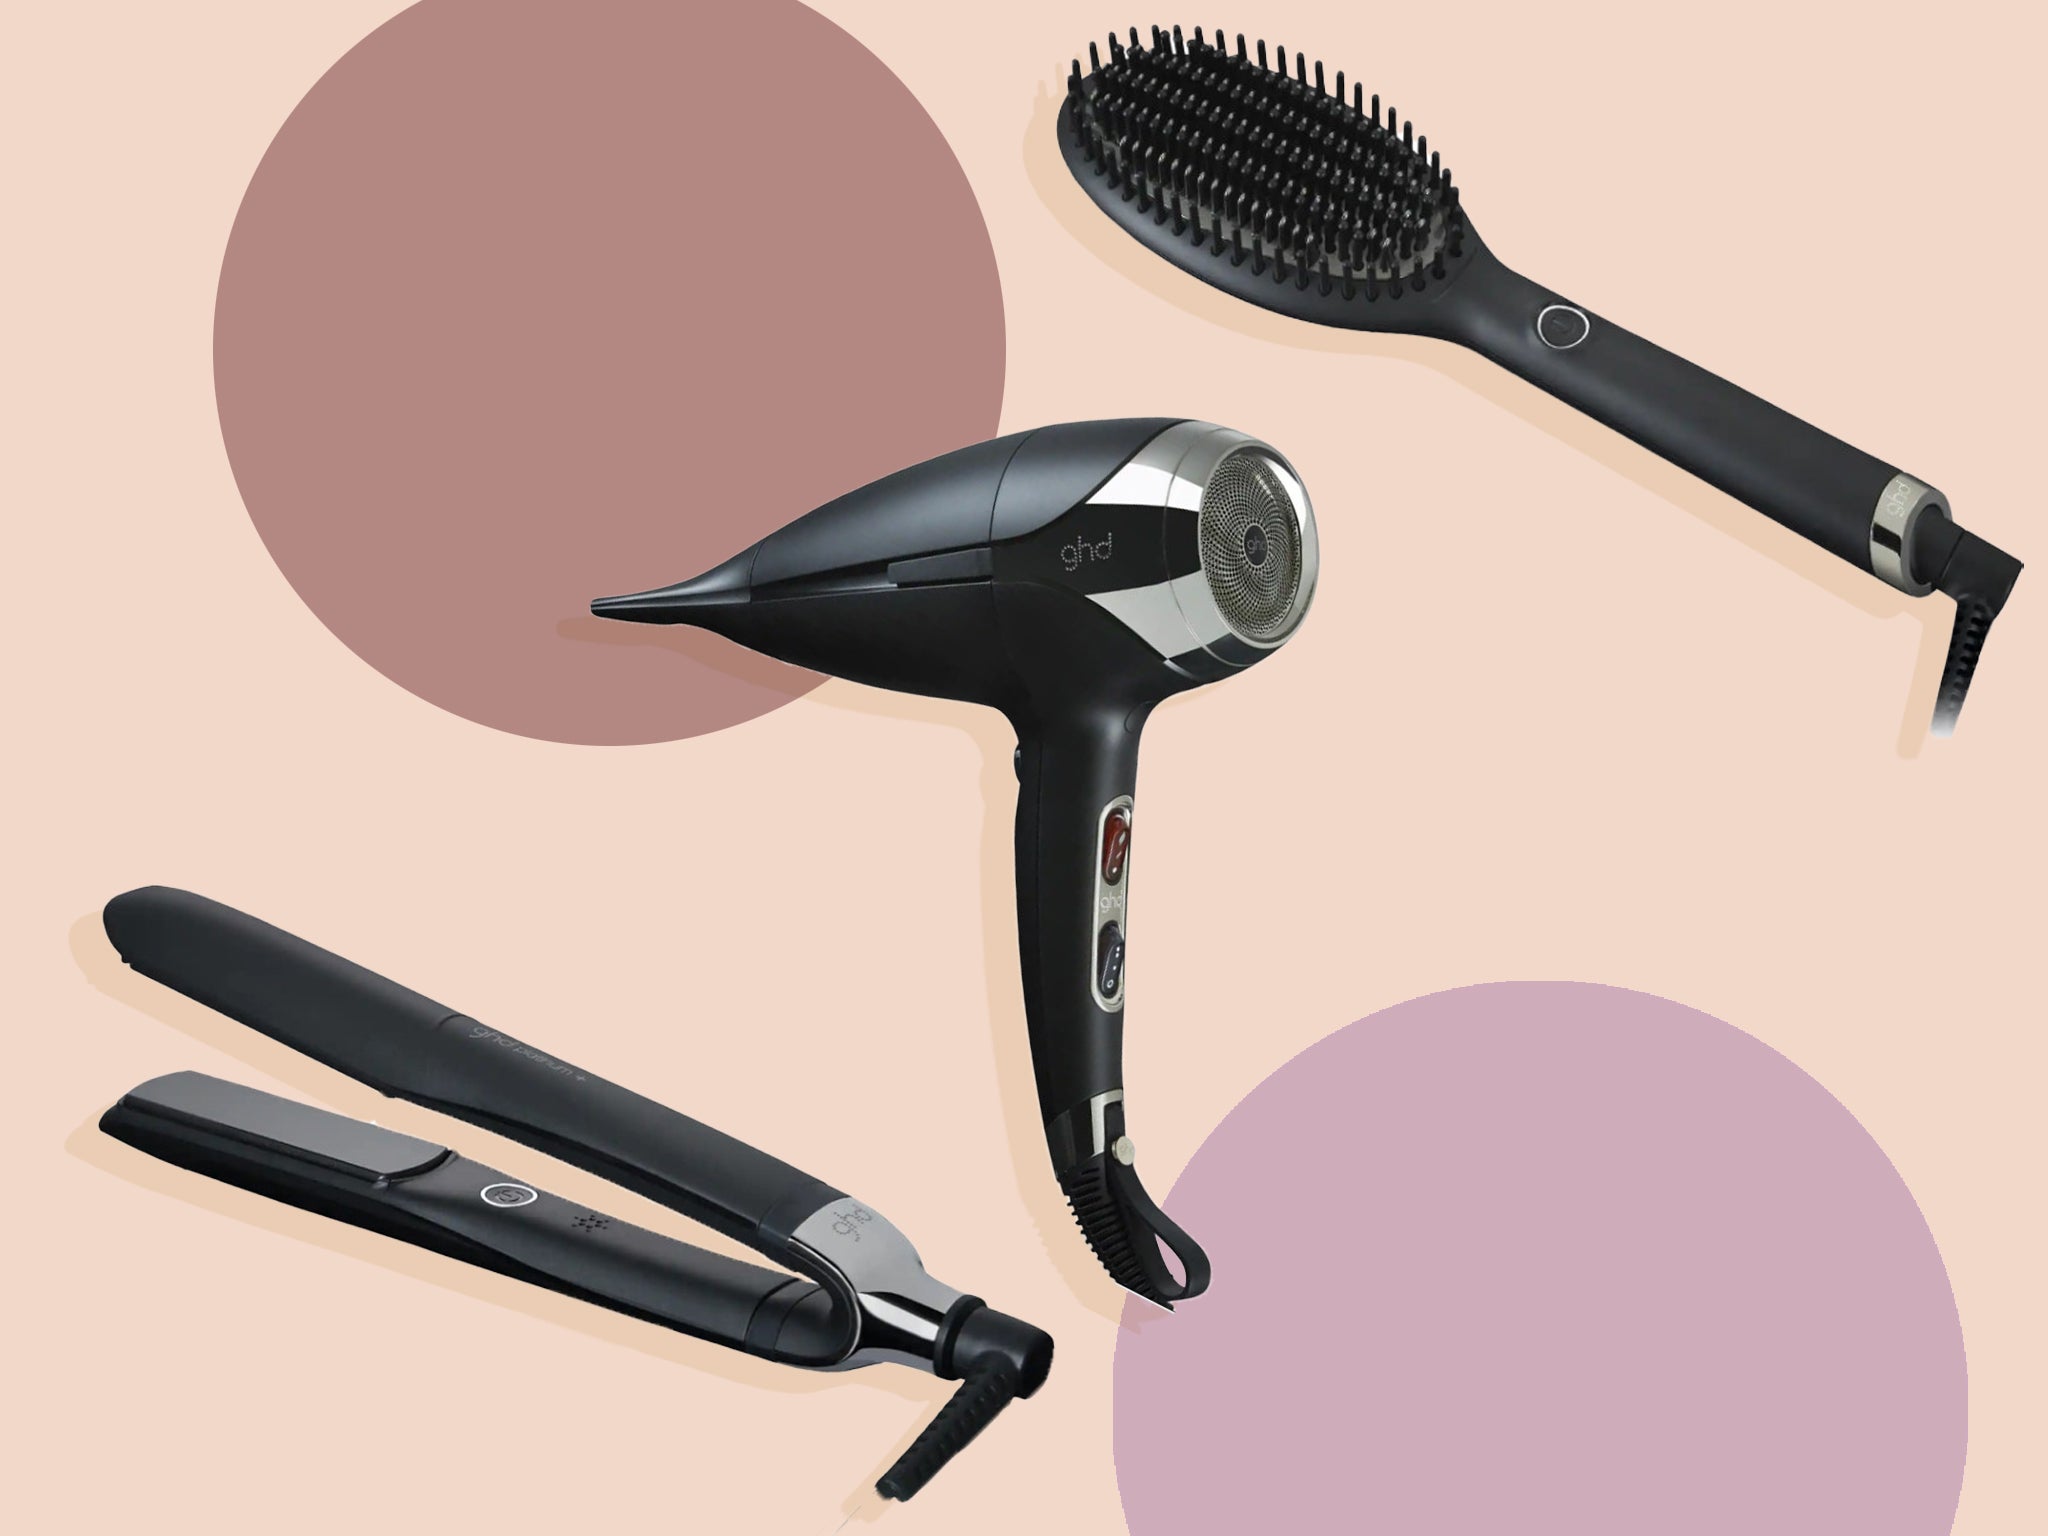 Lookfantastic, Sephora, Boots and Very have all slashed the hair tool prices